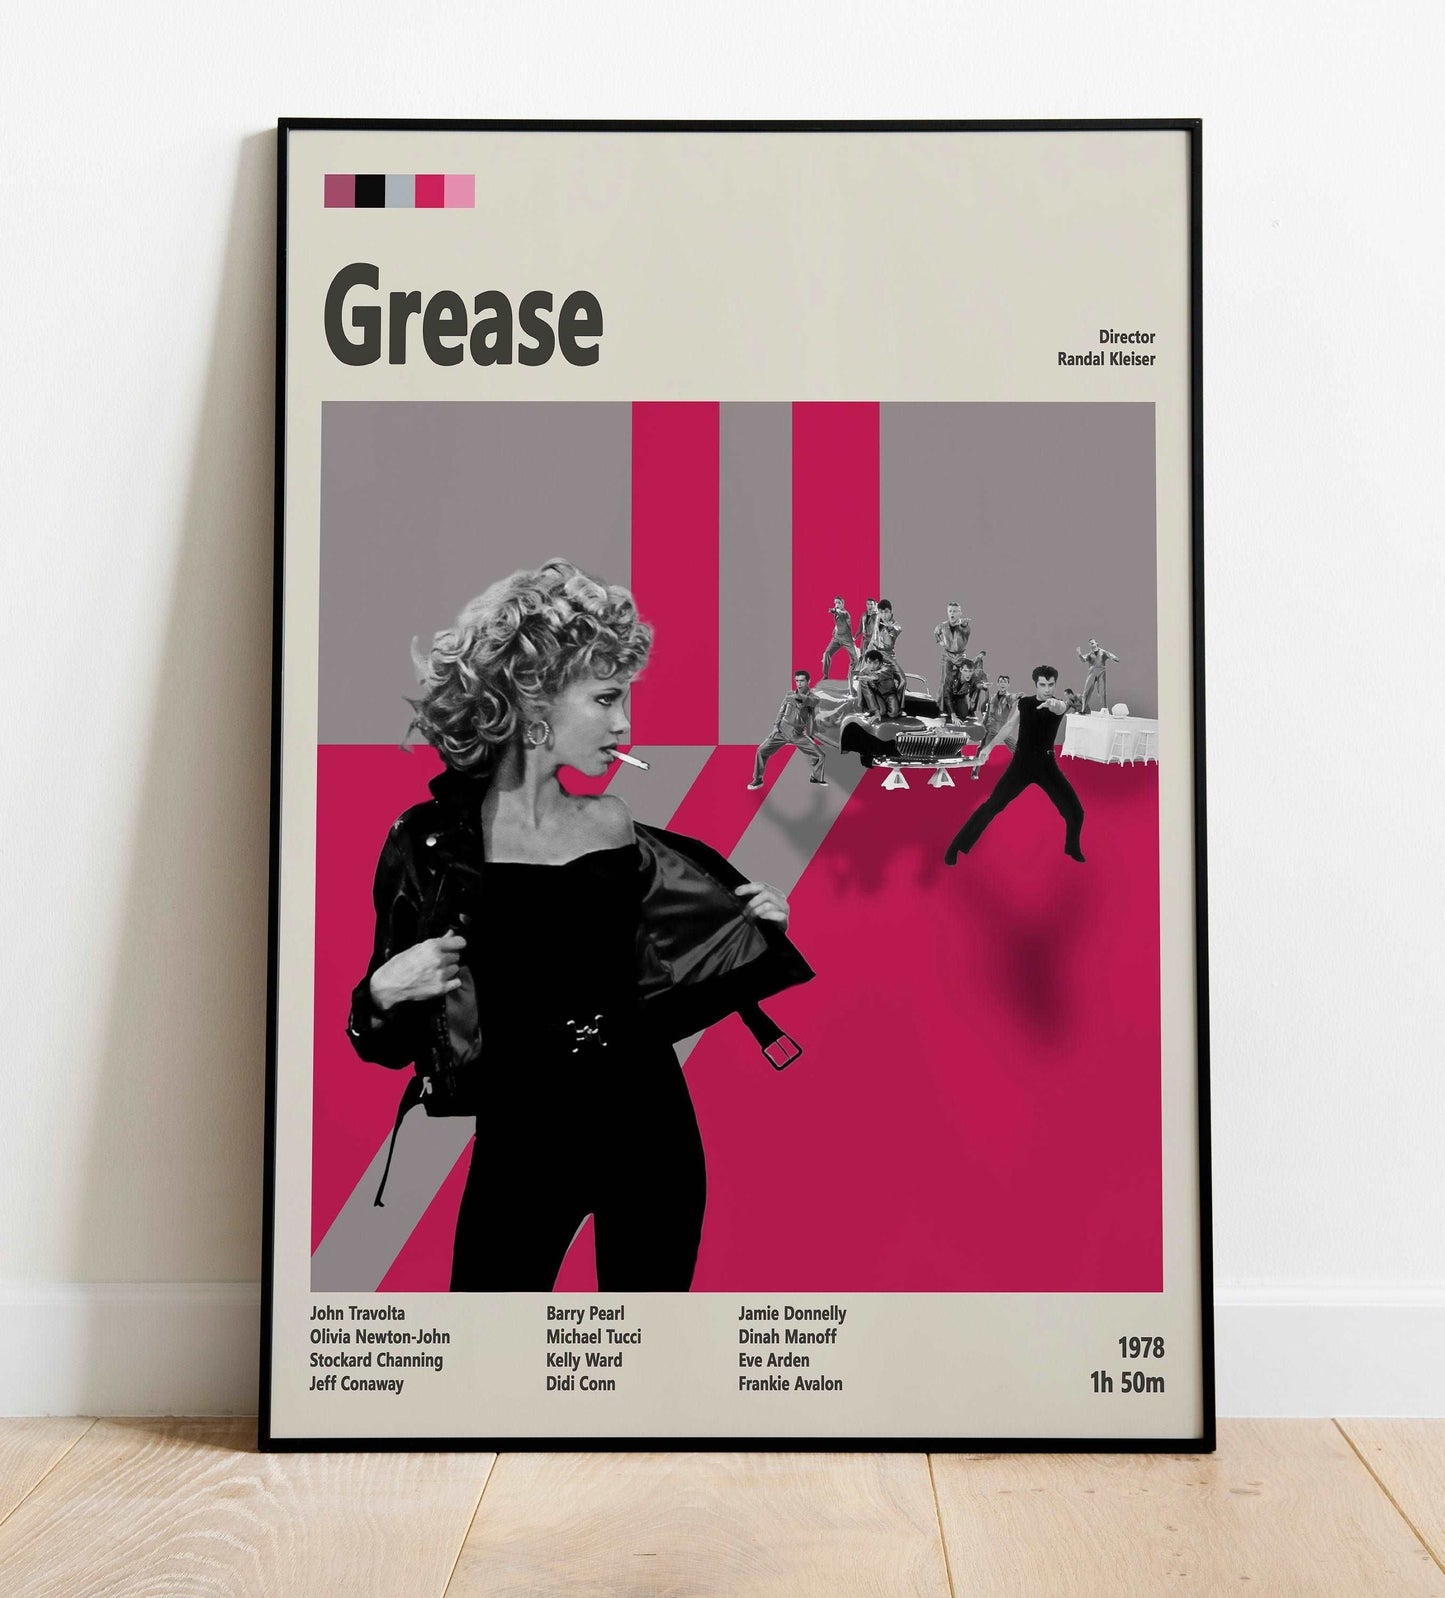 Grease Movie poster - Poster Kingz